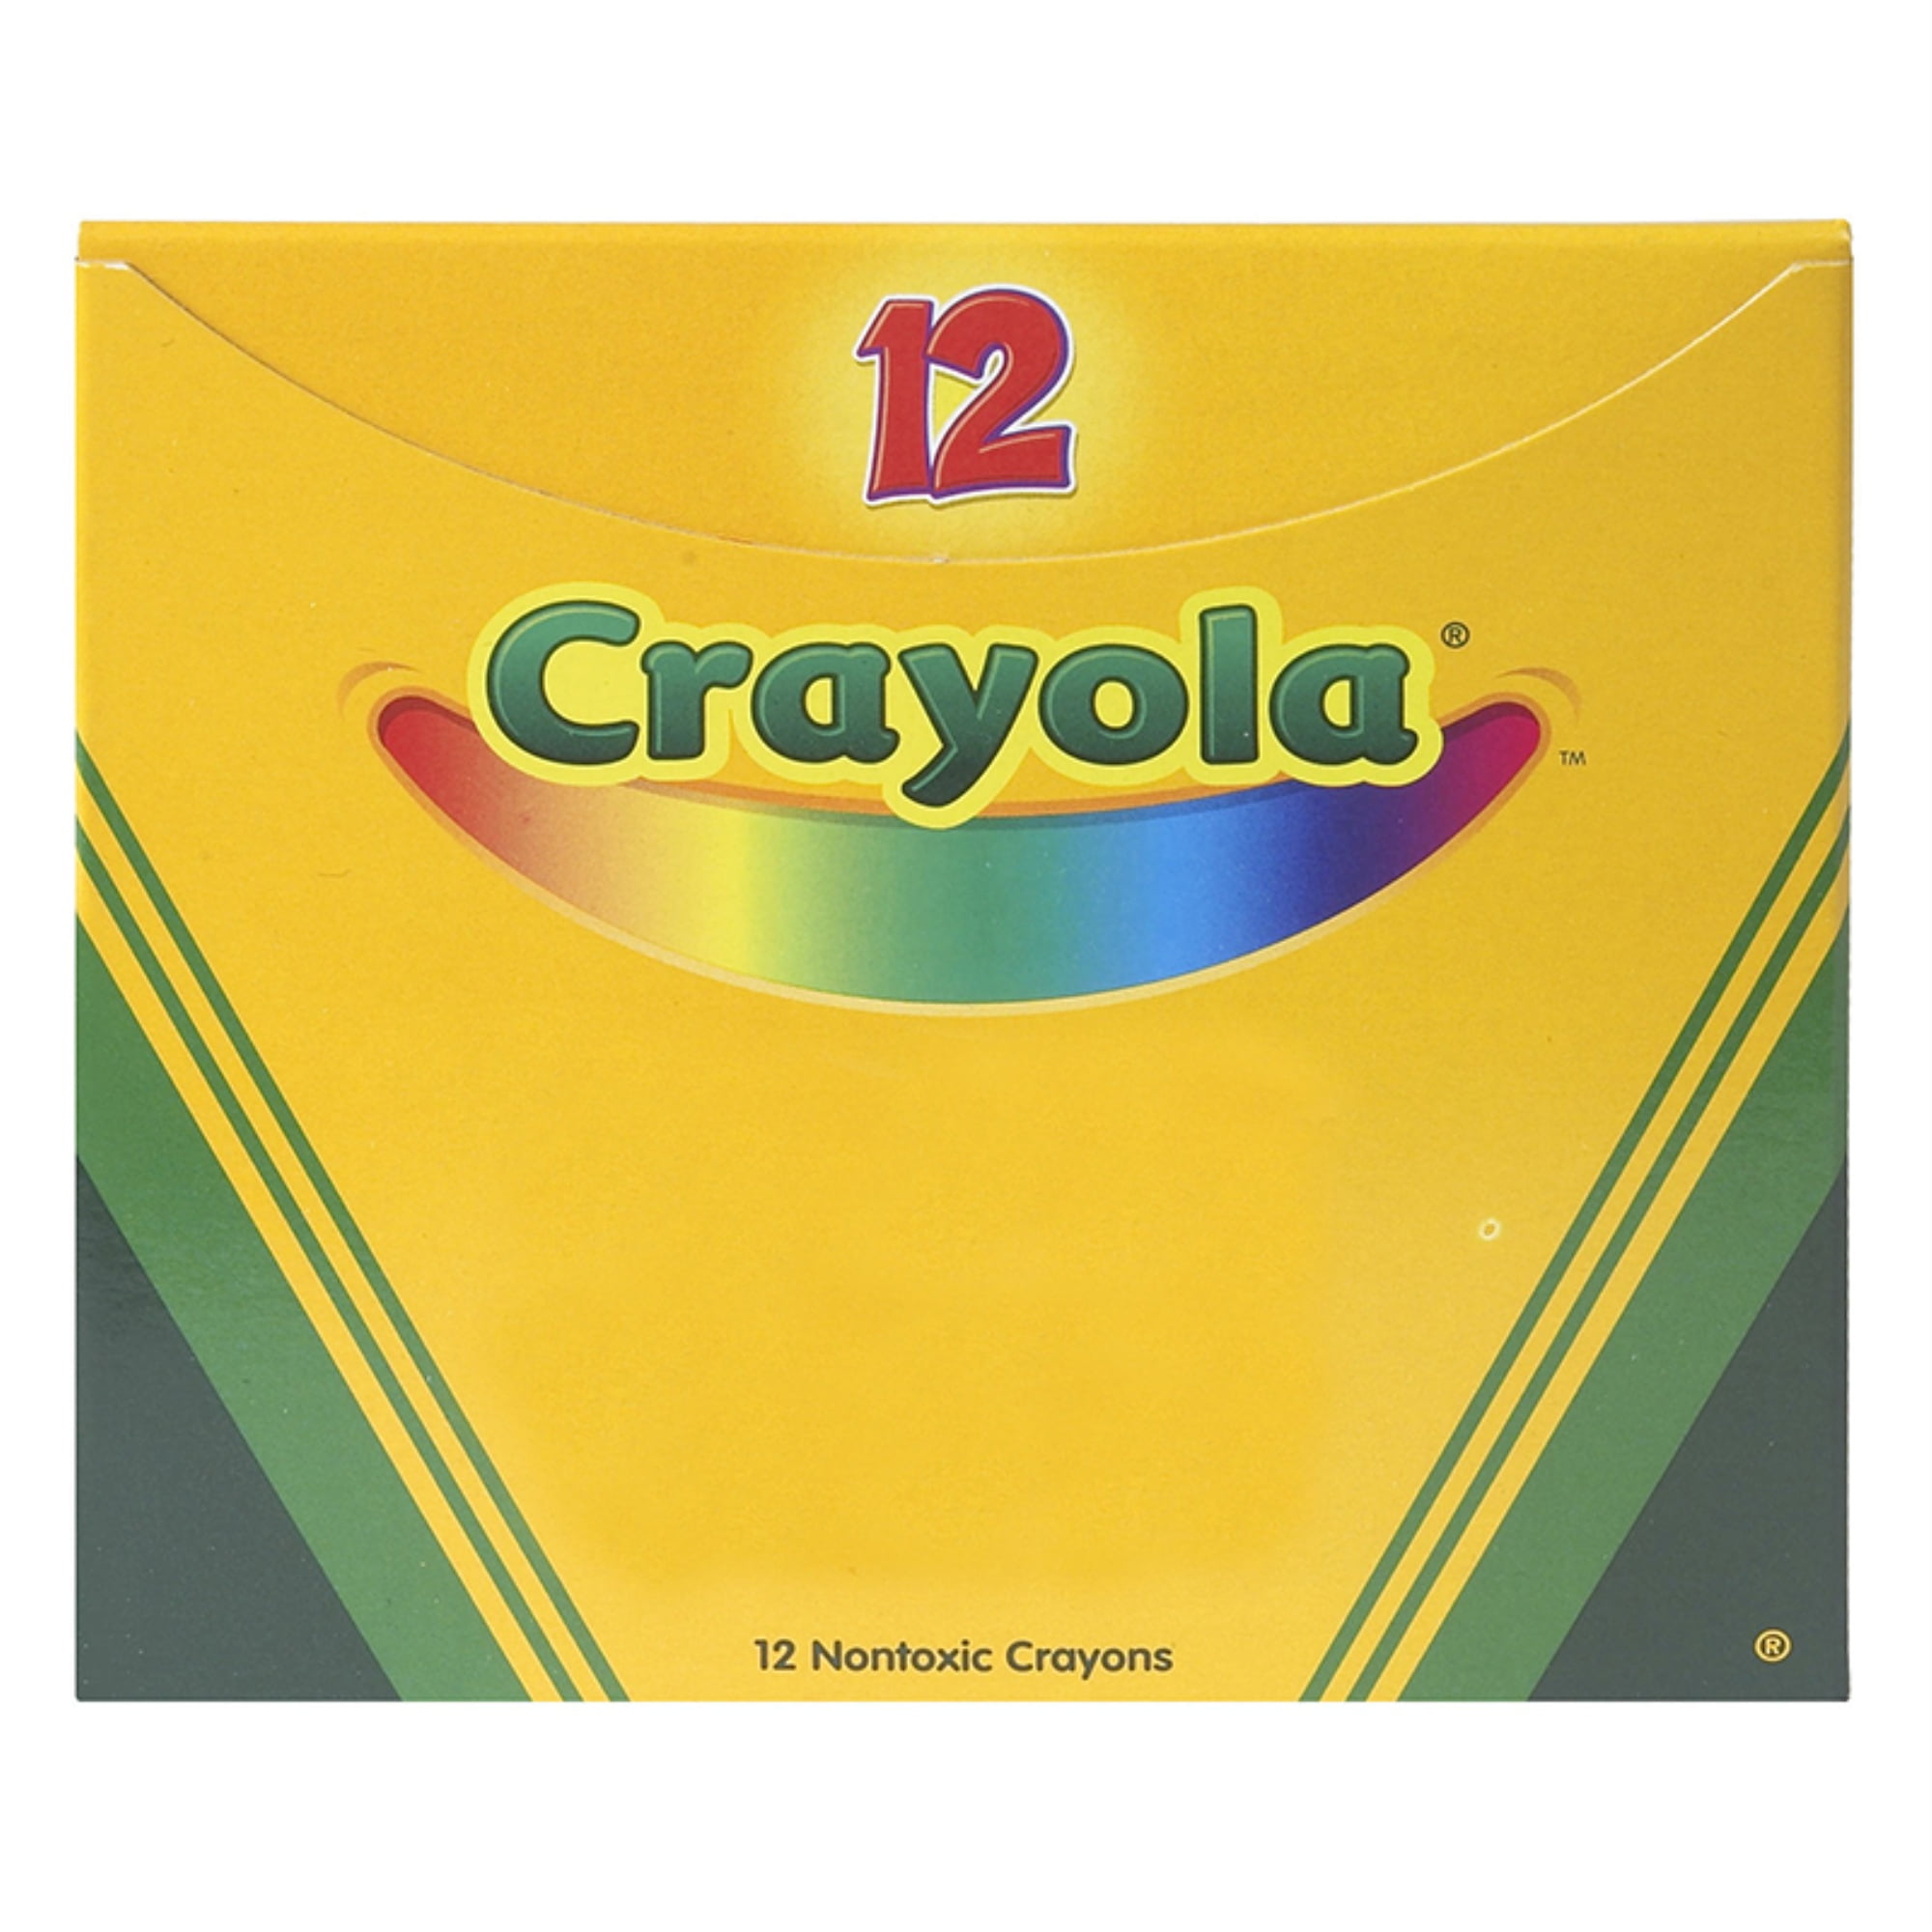 One Case of Crayons 24 Count Case Contains 48 Boxes Crayola Wholesale